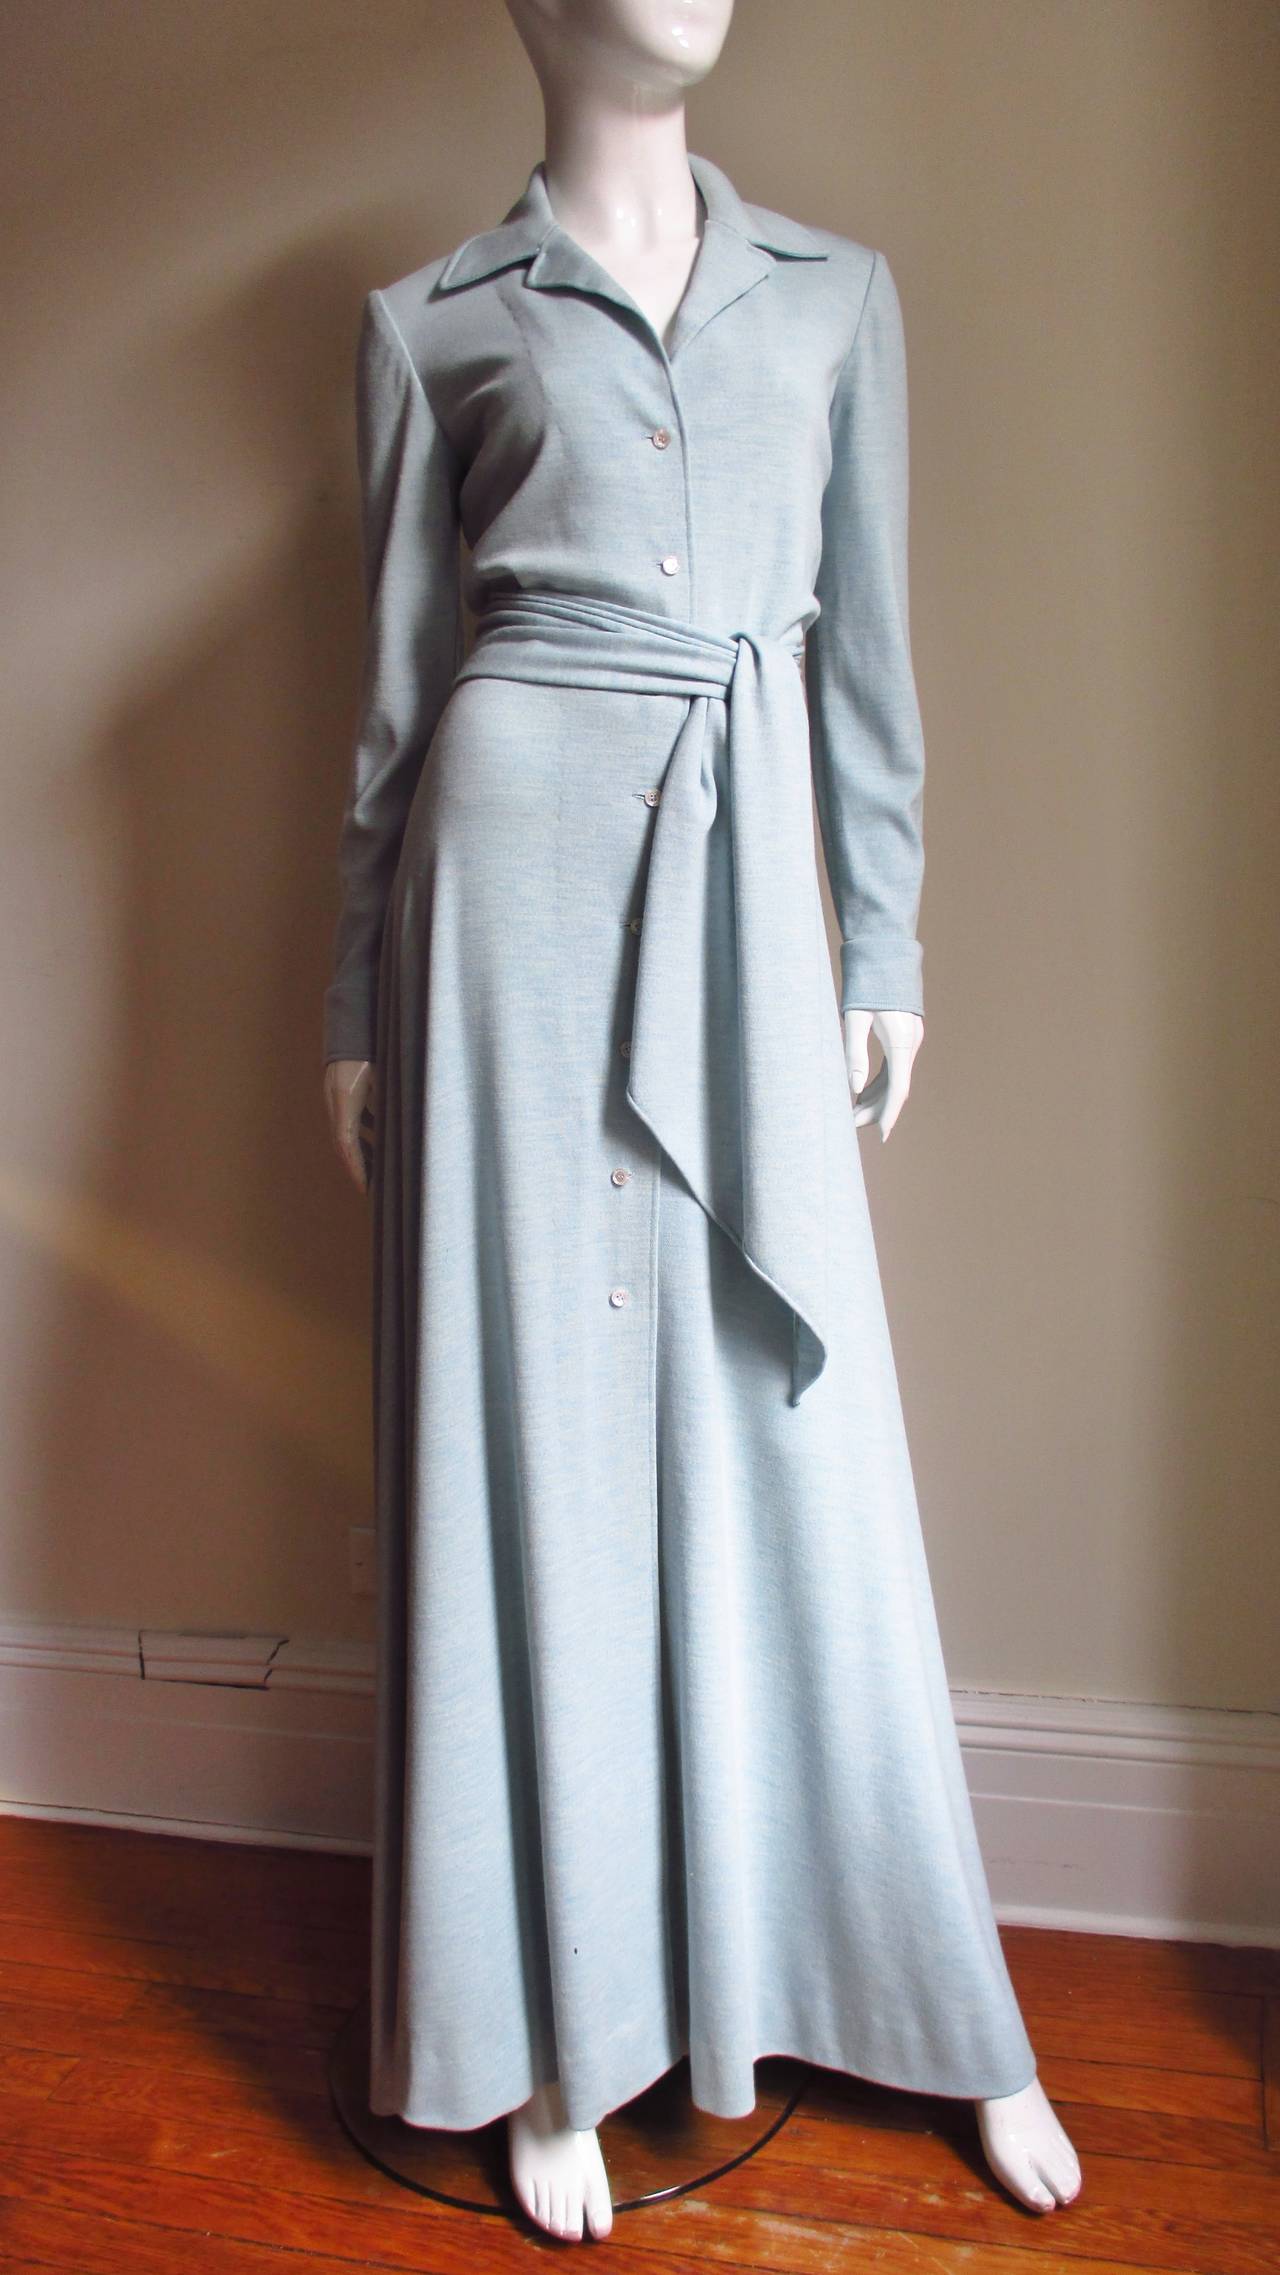 An absolutely gorgeous baby blue cashmere wool blend jersey maxi dress by Halston. It has an open collar, long sleeves with button cuffs and a matching wide tie belt. The skirt flares towards the hemline and the dress buttons up the front. It is